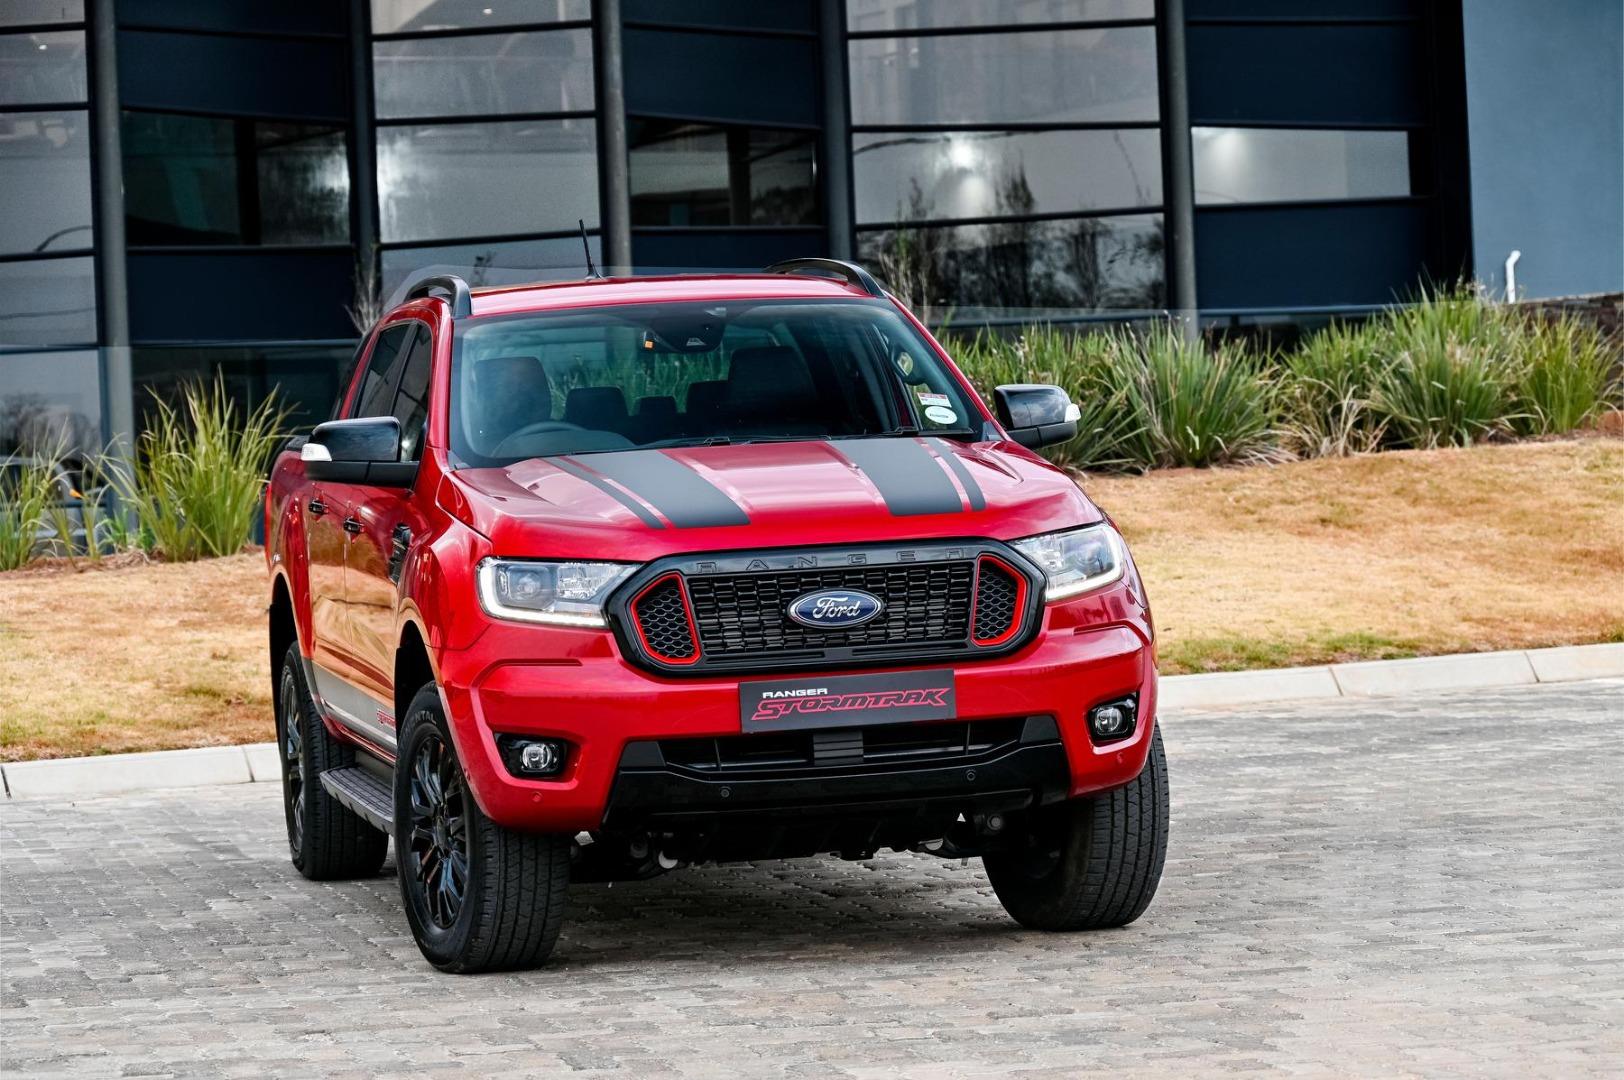 which ford ranger is better, petrol or diesel?